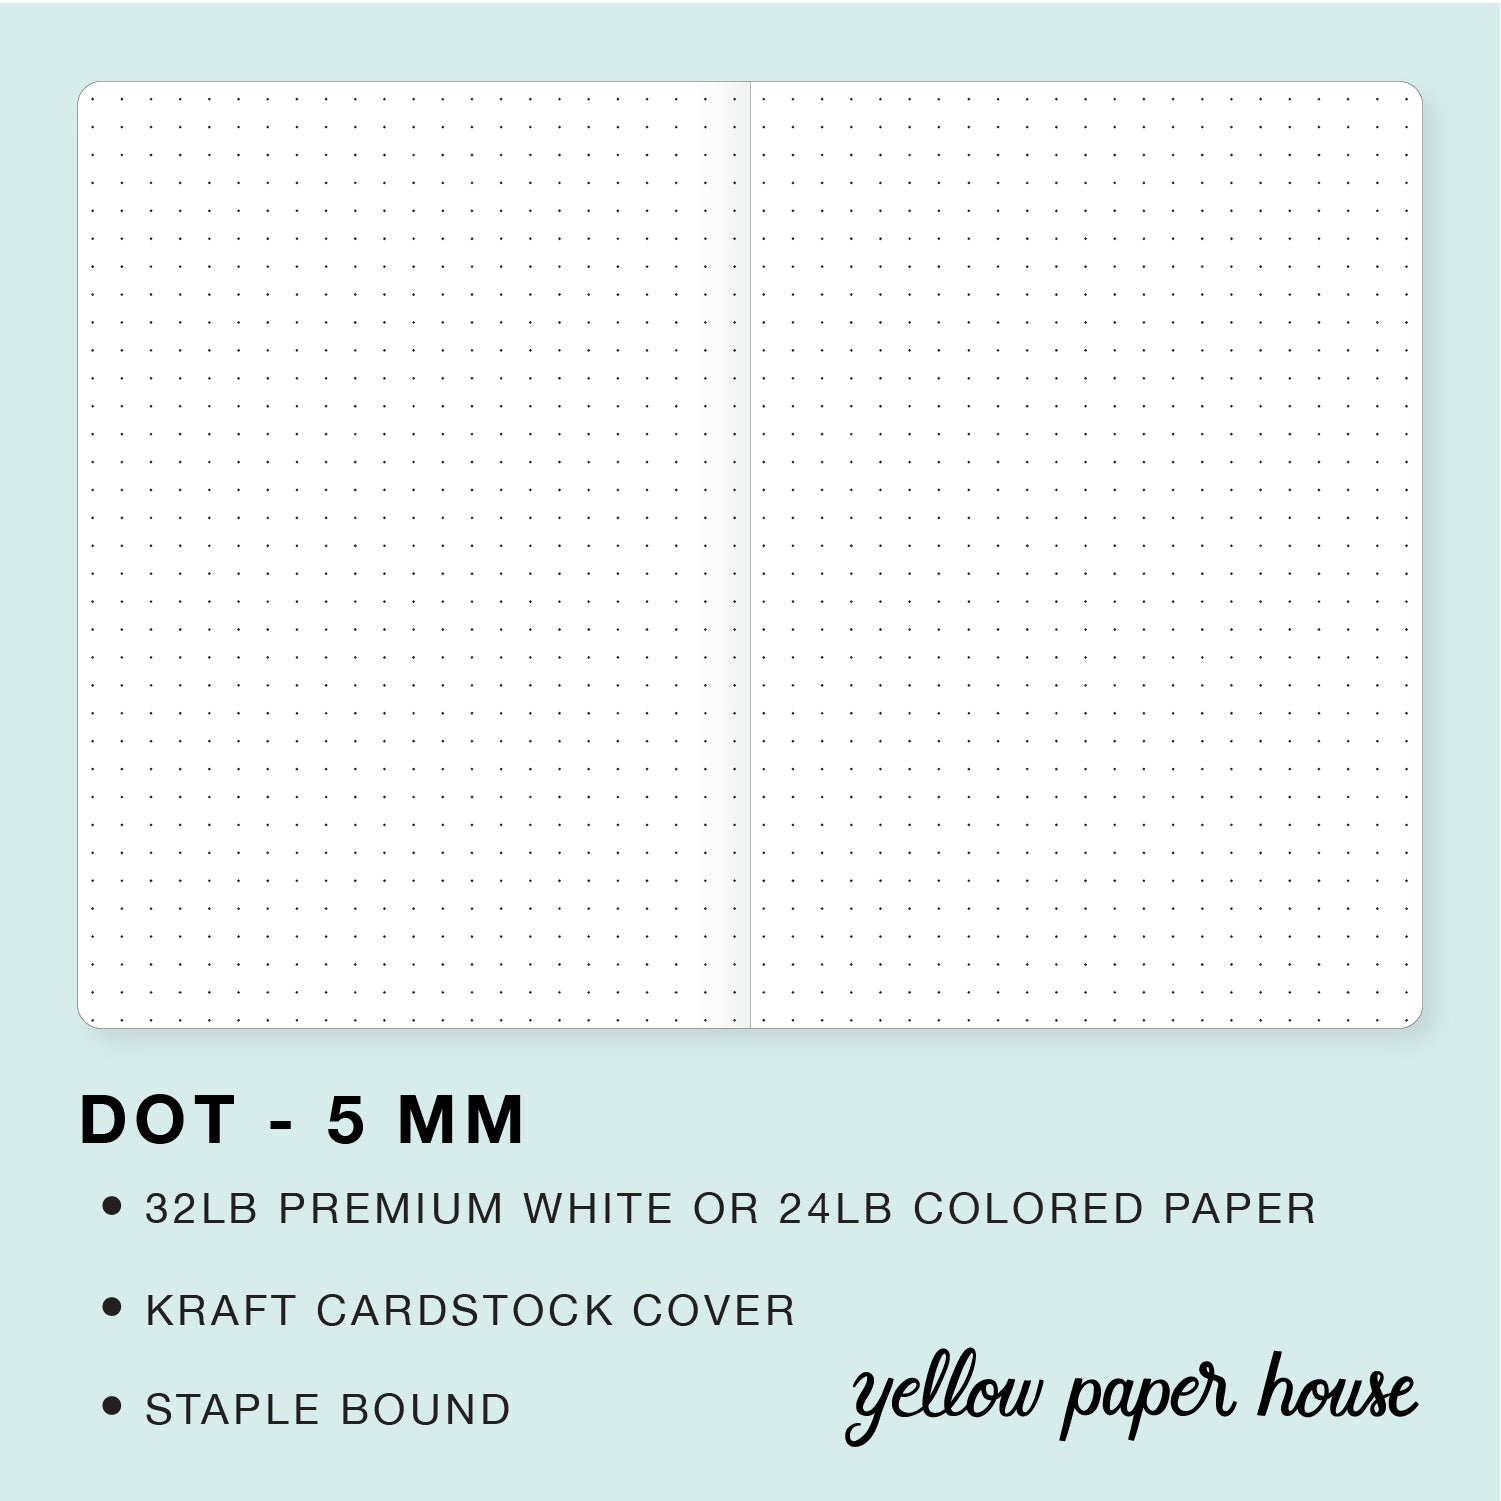 Journal Refill - Dot Grid Ruled - 5x8 (A5) Dot Grid Lined Refill Blank  Paper, Travelers Notebook Refills for any Amazing Office Refillable  Journal and Notebooks